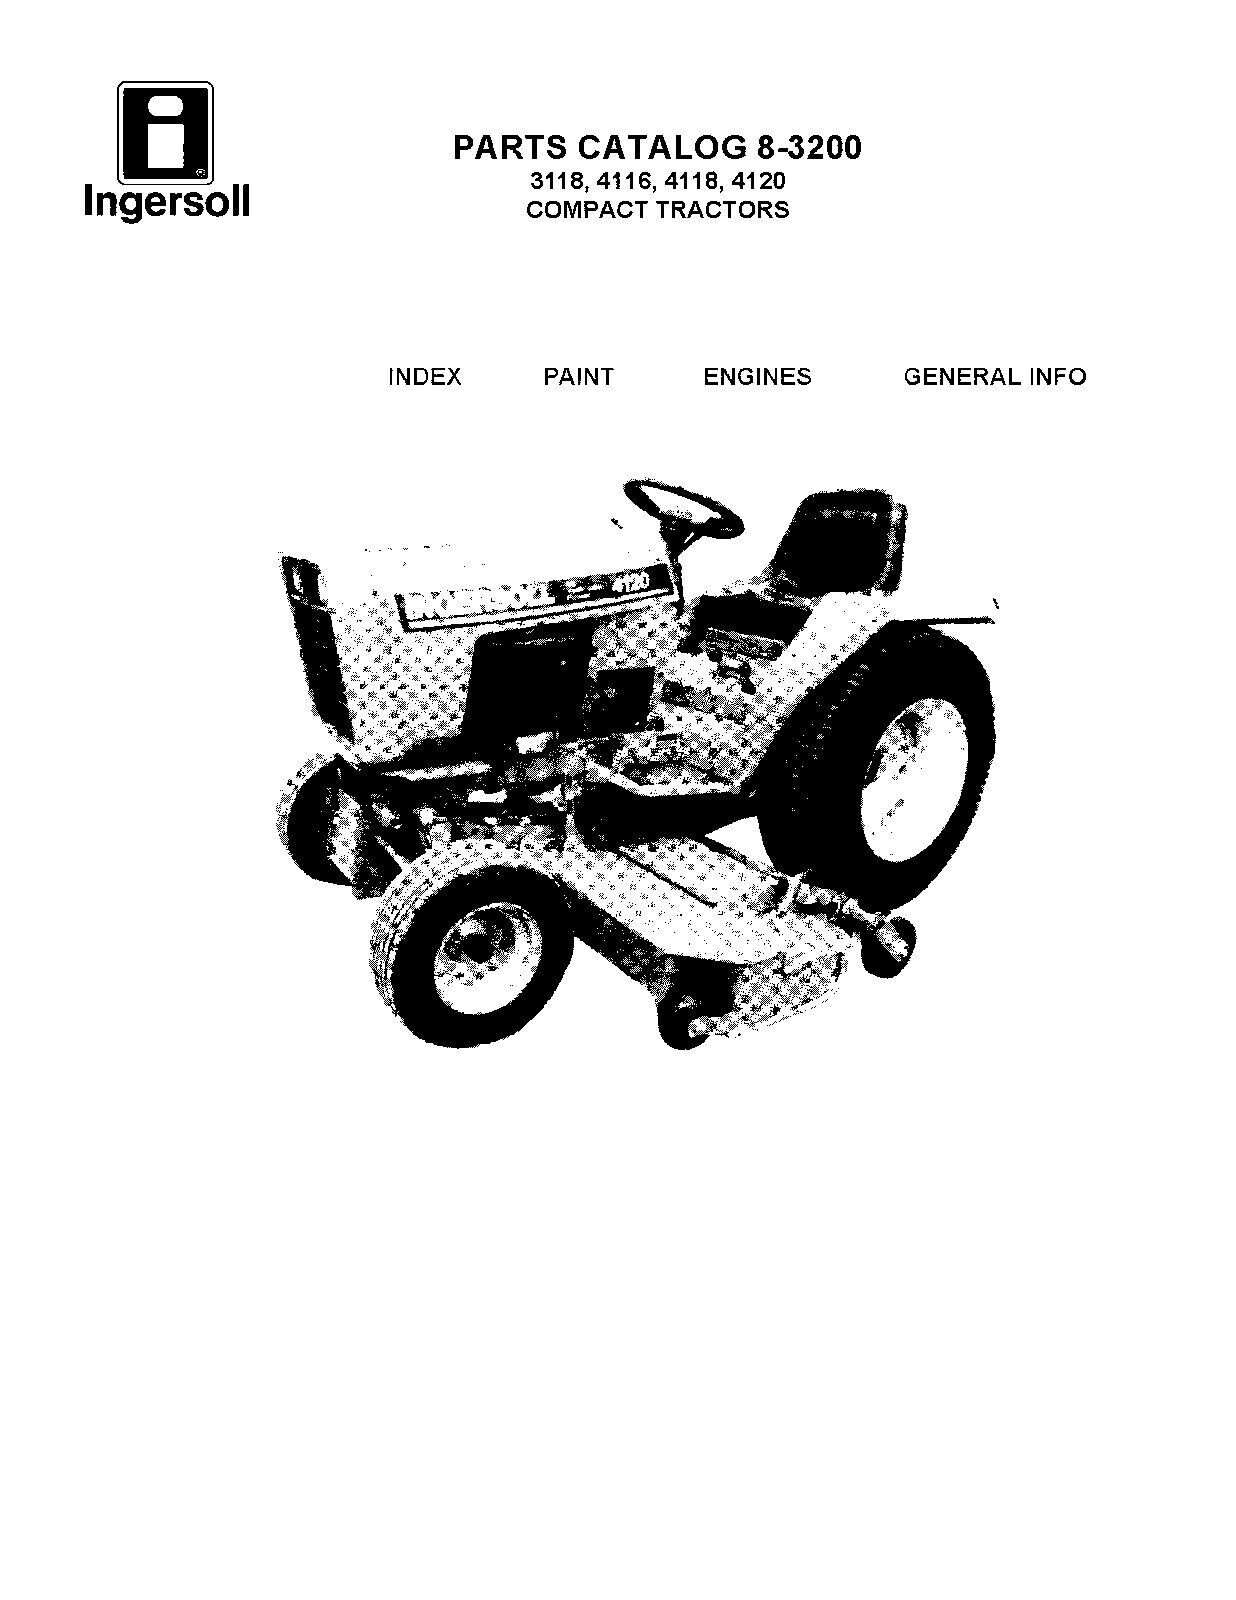 TRACTOR Service Parts Manual Fits Ingersoll COMPACT LAWN TRACTORS 4118 4120